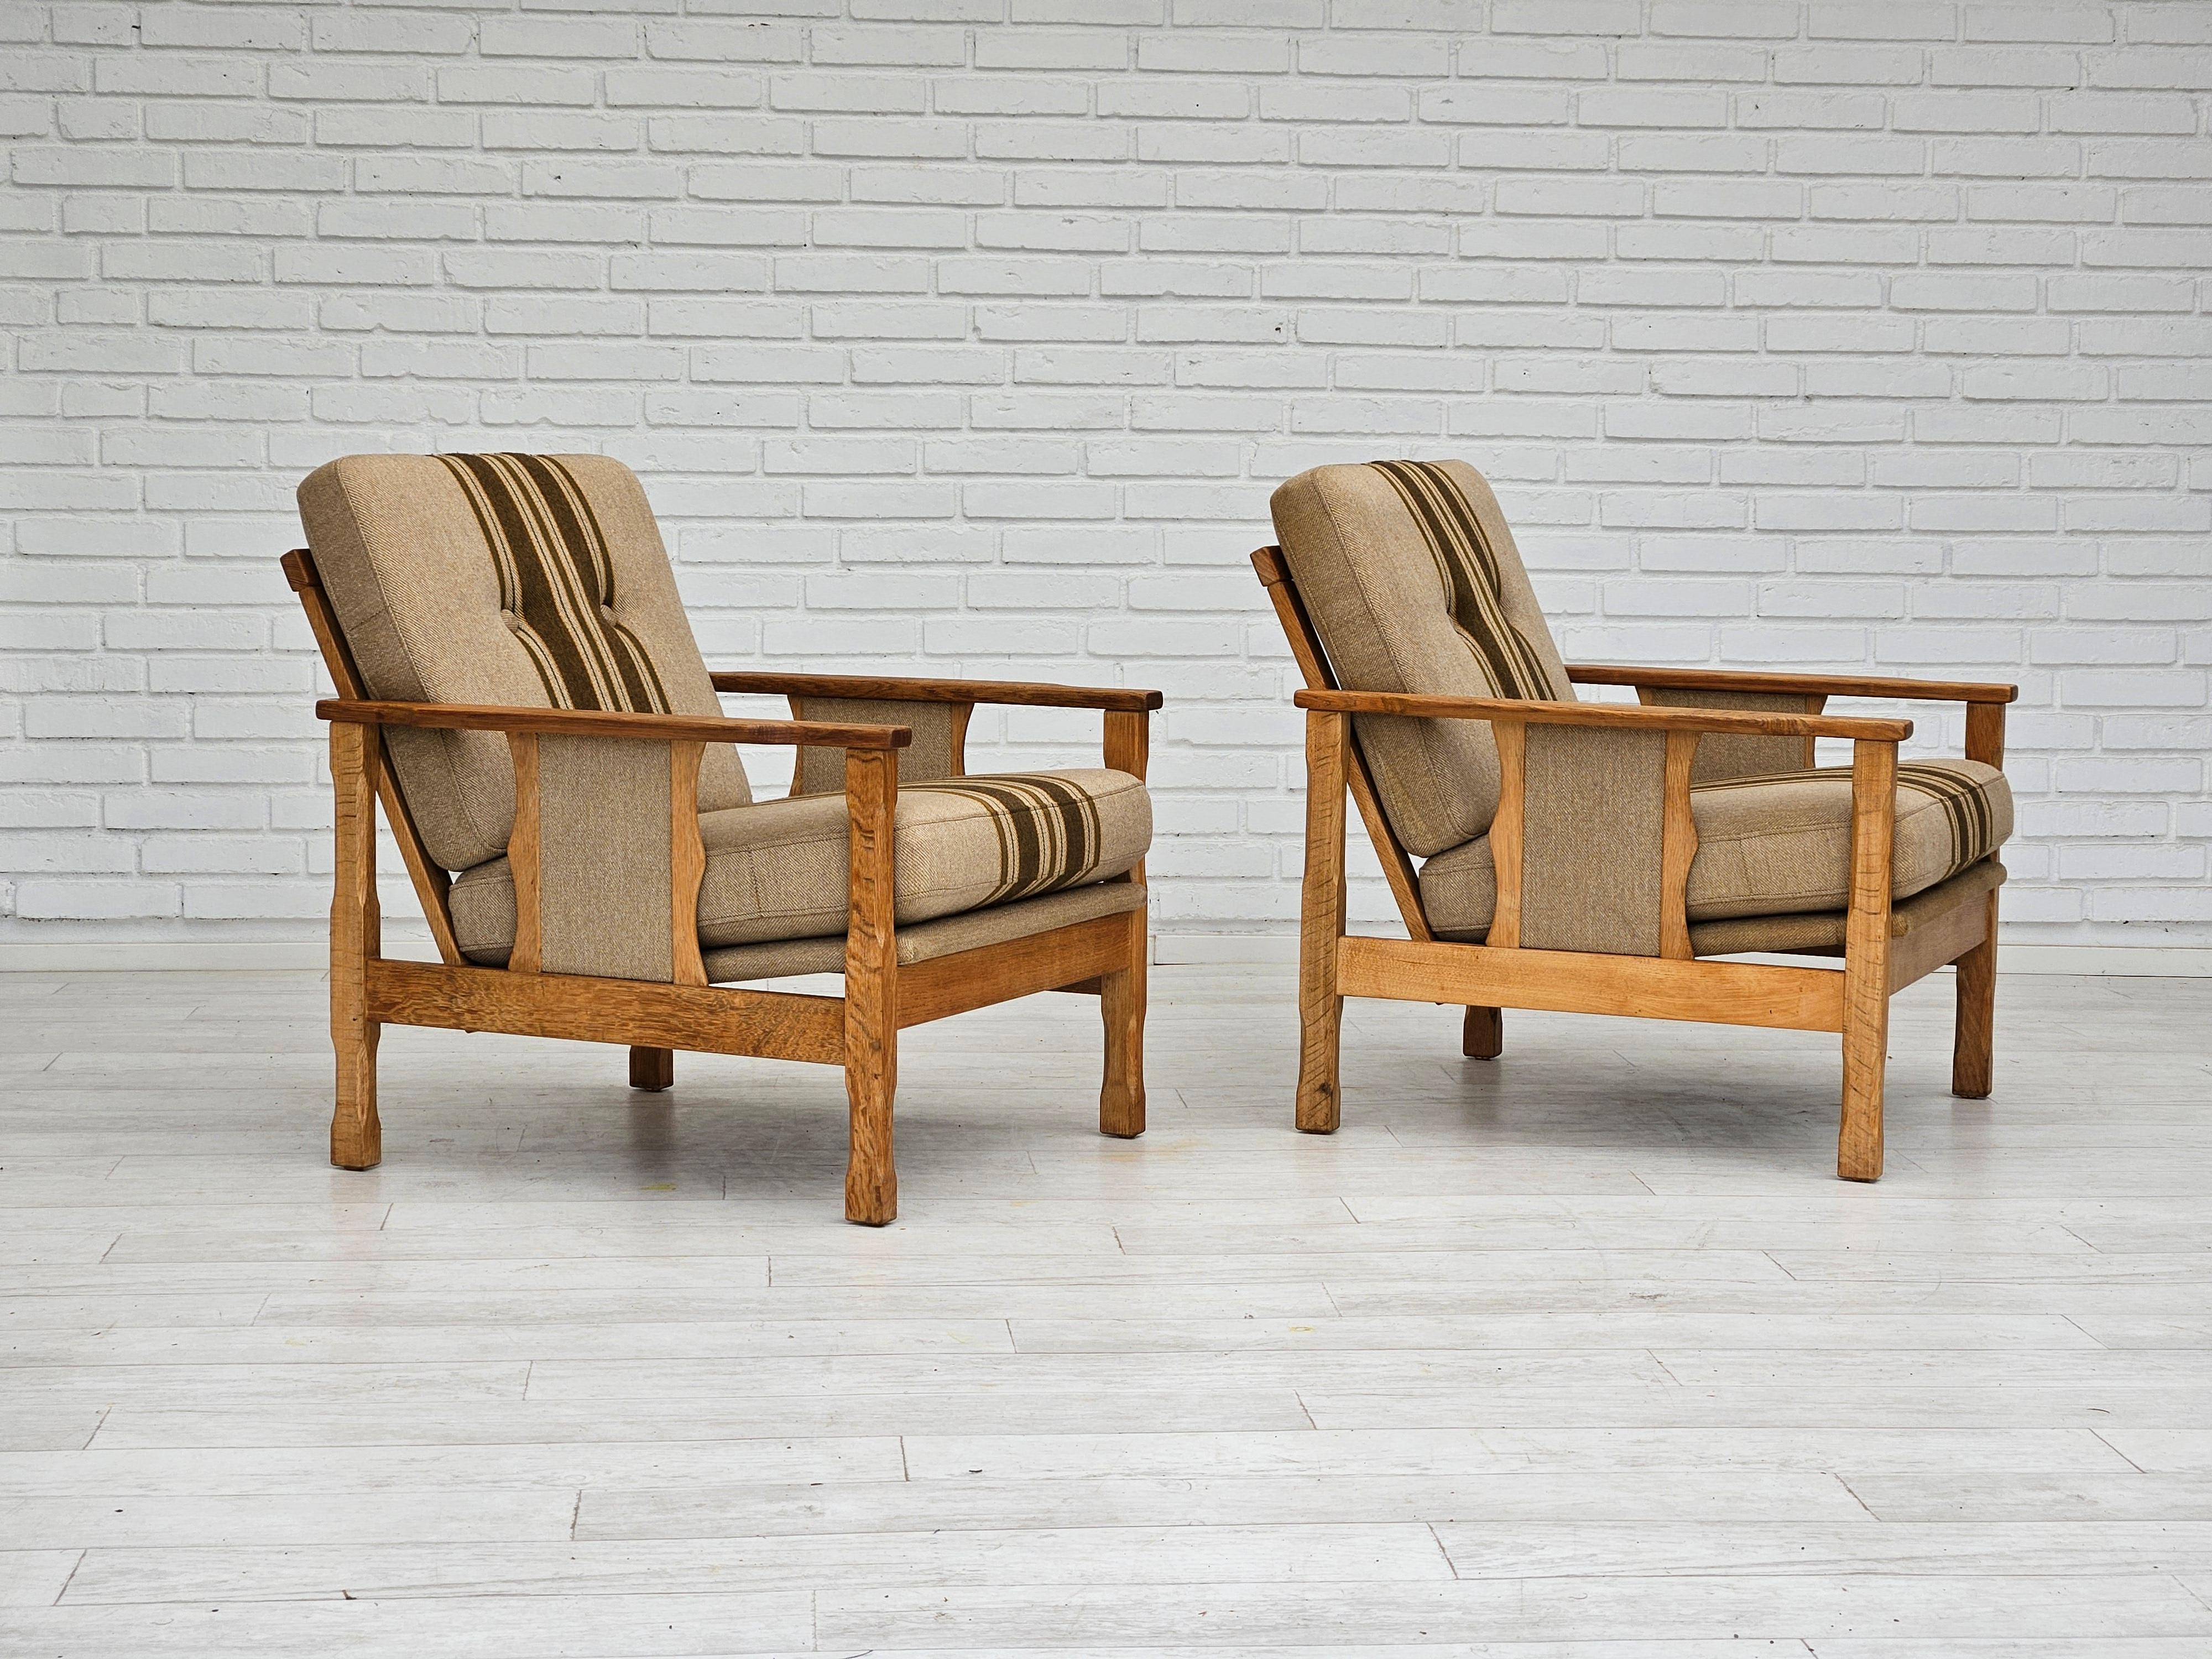 1970s, pair of Danish lounge chairs in original very good condition: no smells and no stains. Furniture wool fabric, oak wood. Removable cushions. Manufactured by Danish furniture manufacturer in about 1970s. ( price for set of two chairs )